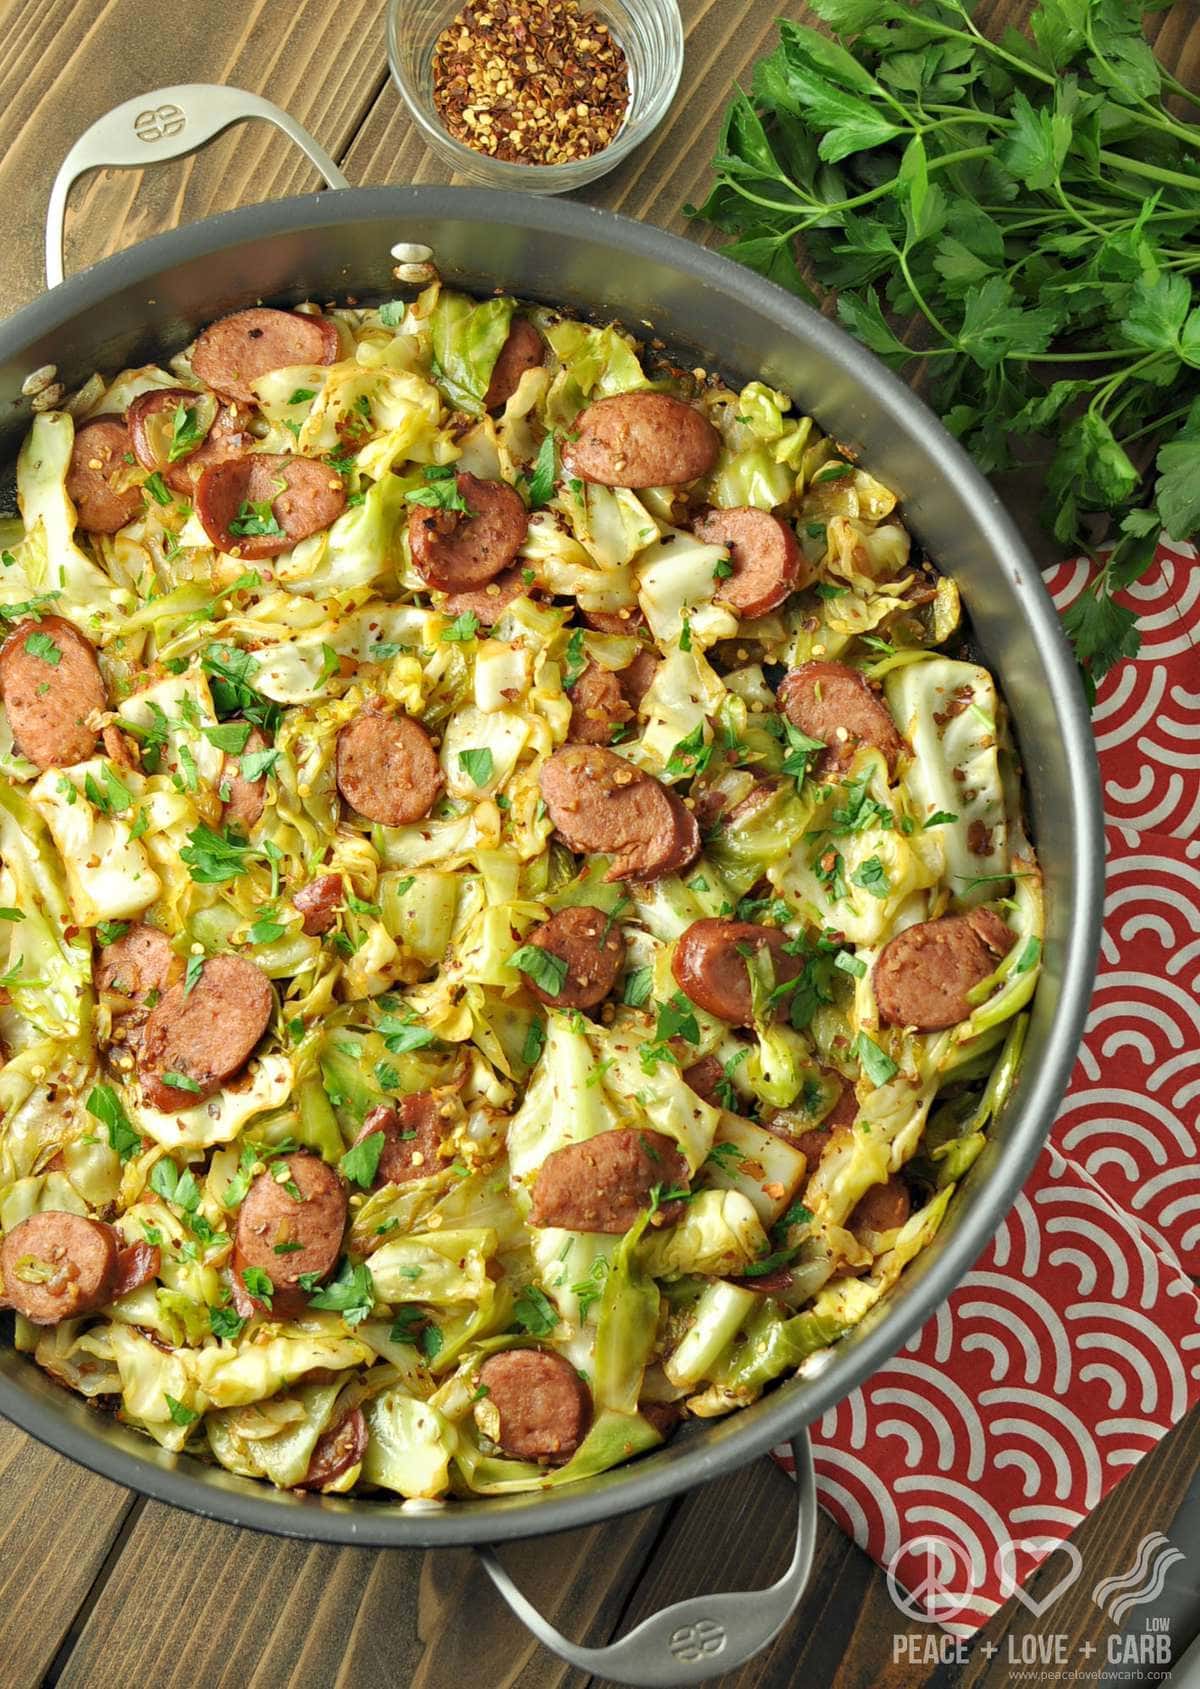 Fried Cabbage With Kielbasa Low Carb Paleo Gluten Free,Weevil Bugs